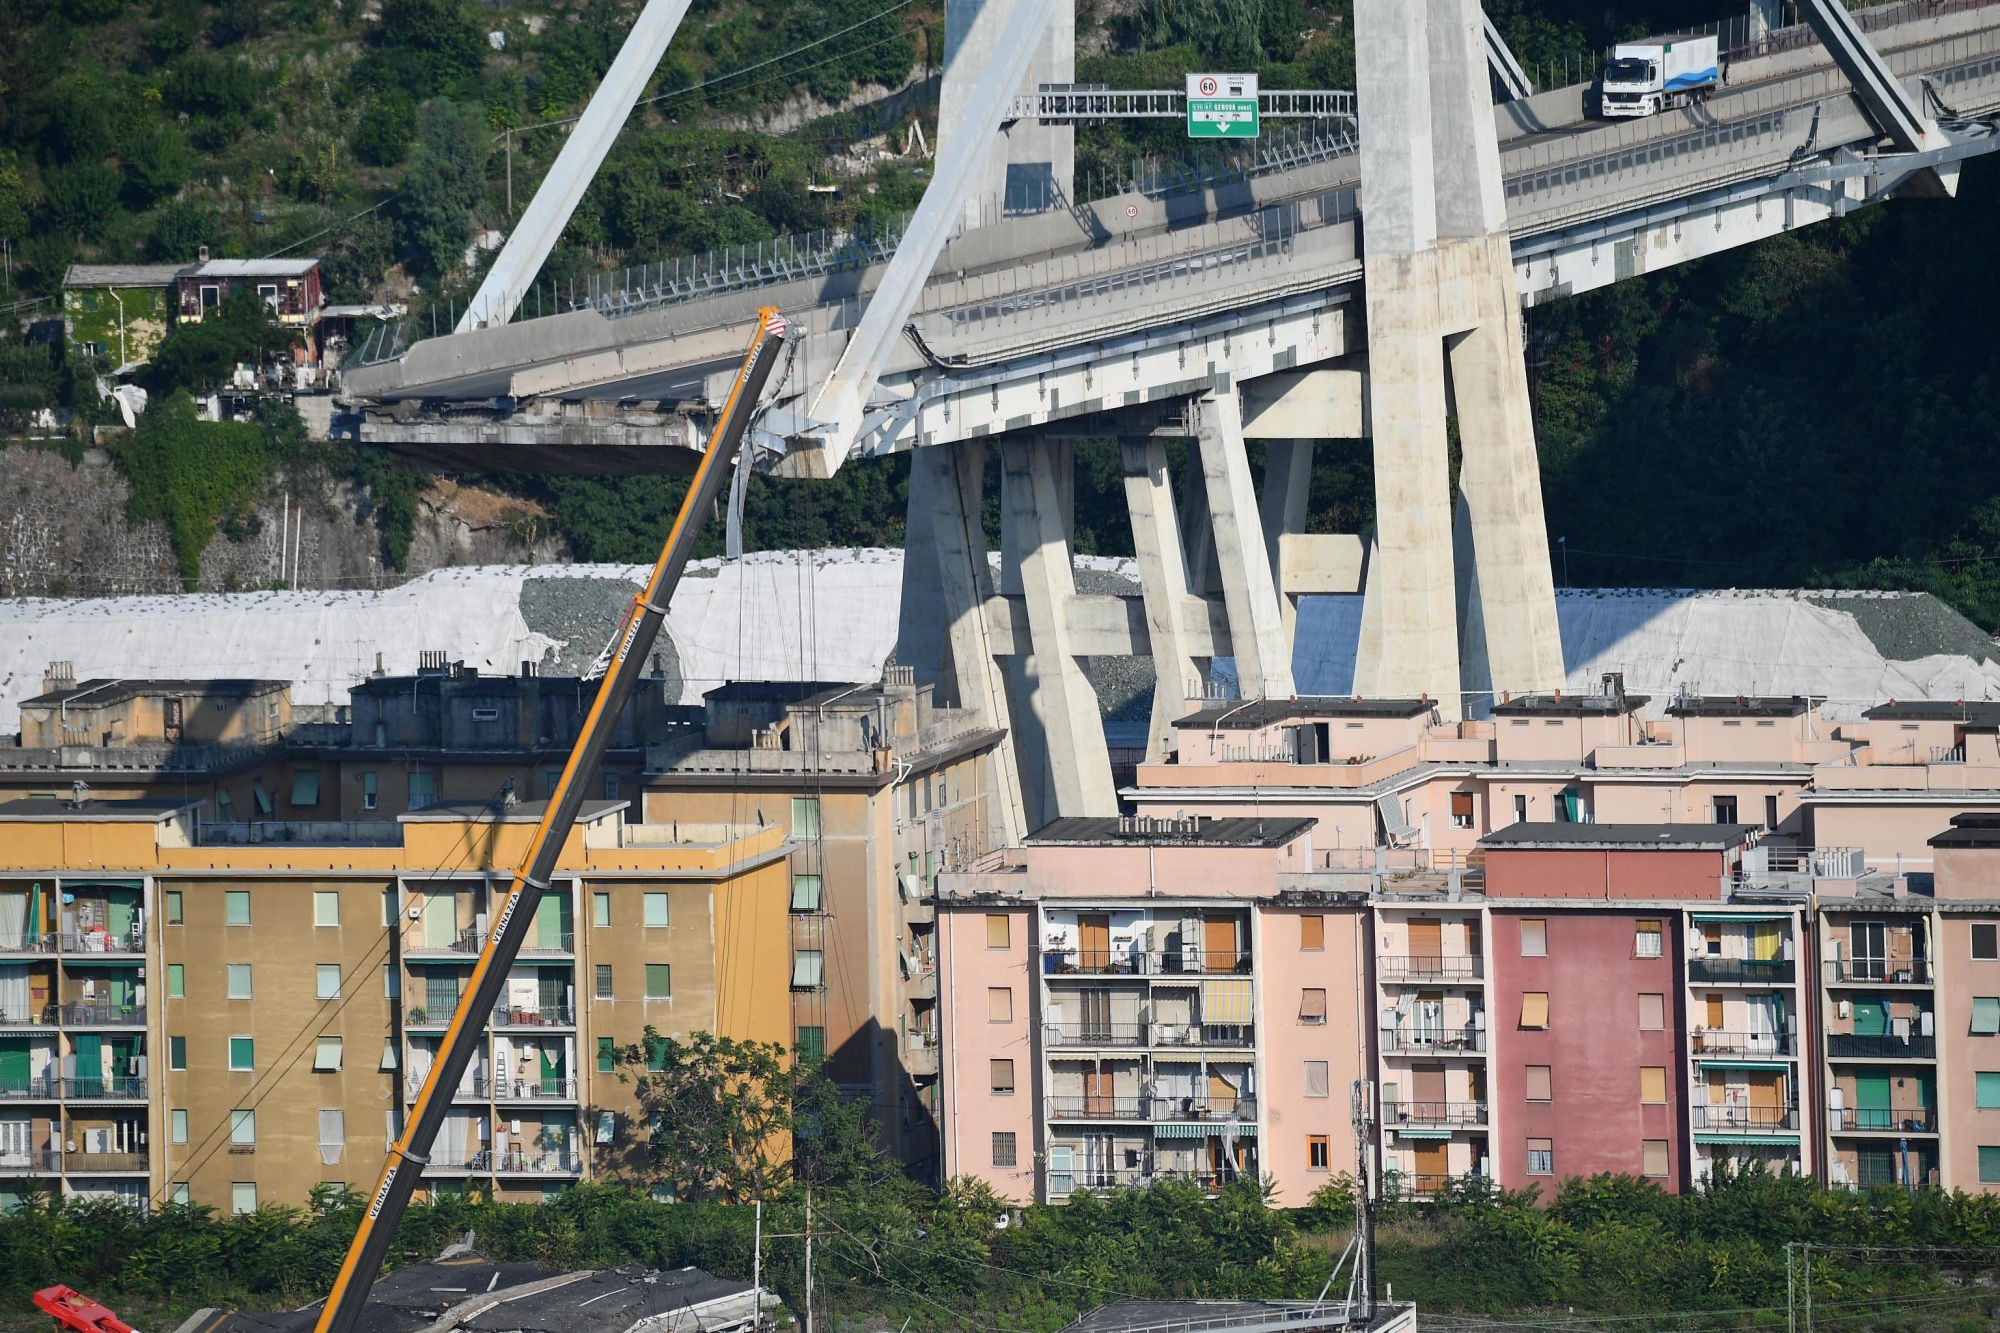 epa06958795 A general view showing a part of the partially collapsed Morandi bridge, in Genoa, Italy, 19 August 2018. Italian authorities, worried about the stability of remaining large sections of the bridge, evacuated about 630 people from nearby apartments. The Morandi bridge partially collapsed on 14 August, killing at least 41 people.  EPA/LUCA ZENNARO ITALY GENOA MORANDI BRIDGE COLLAPSE AFTERMATH